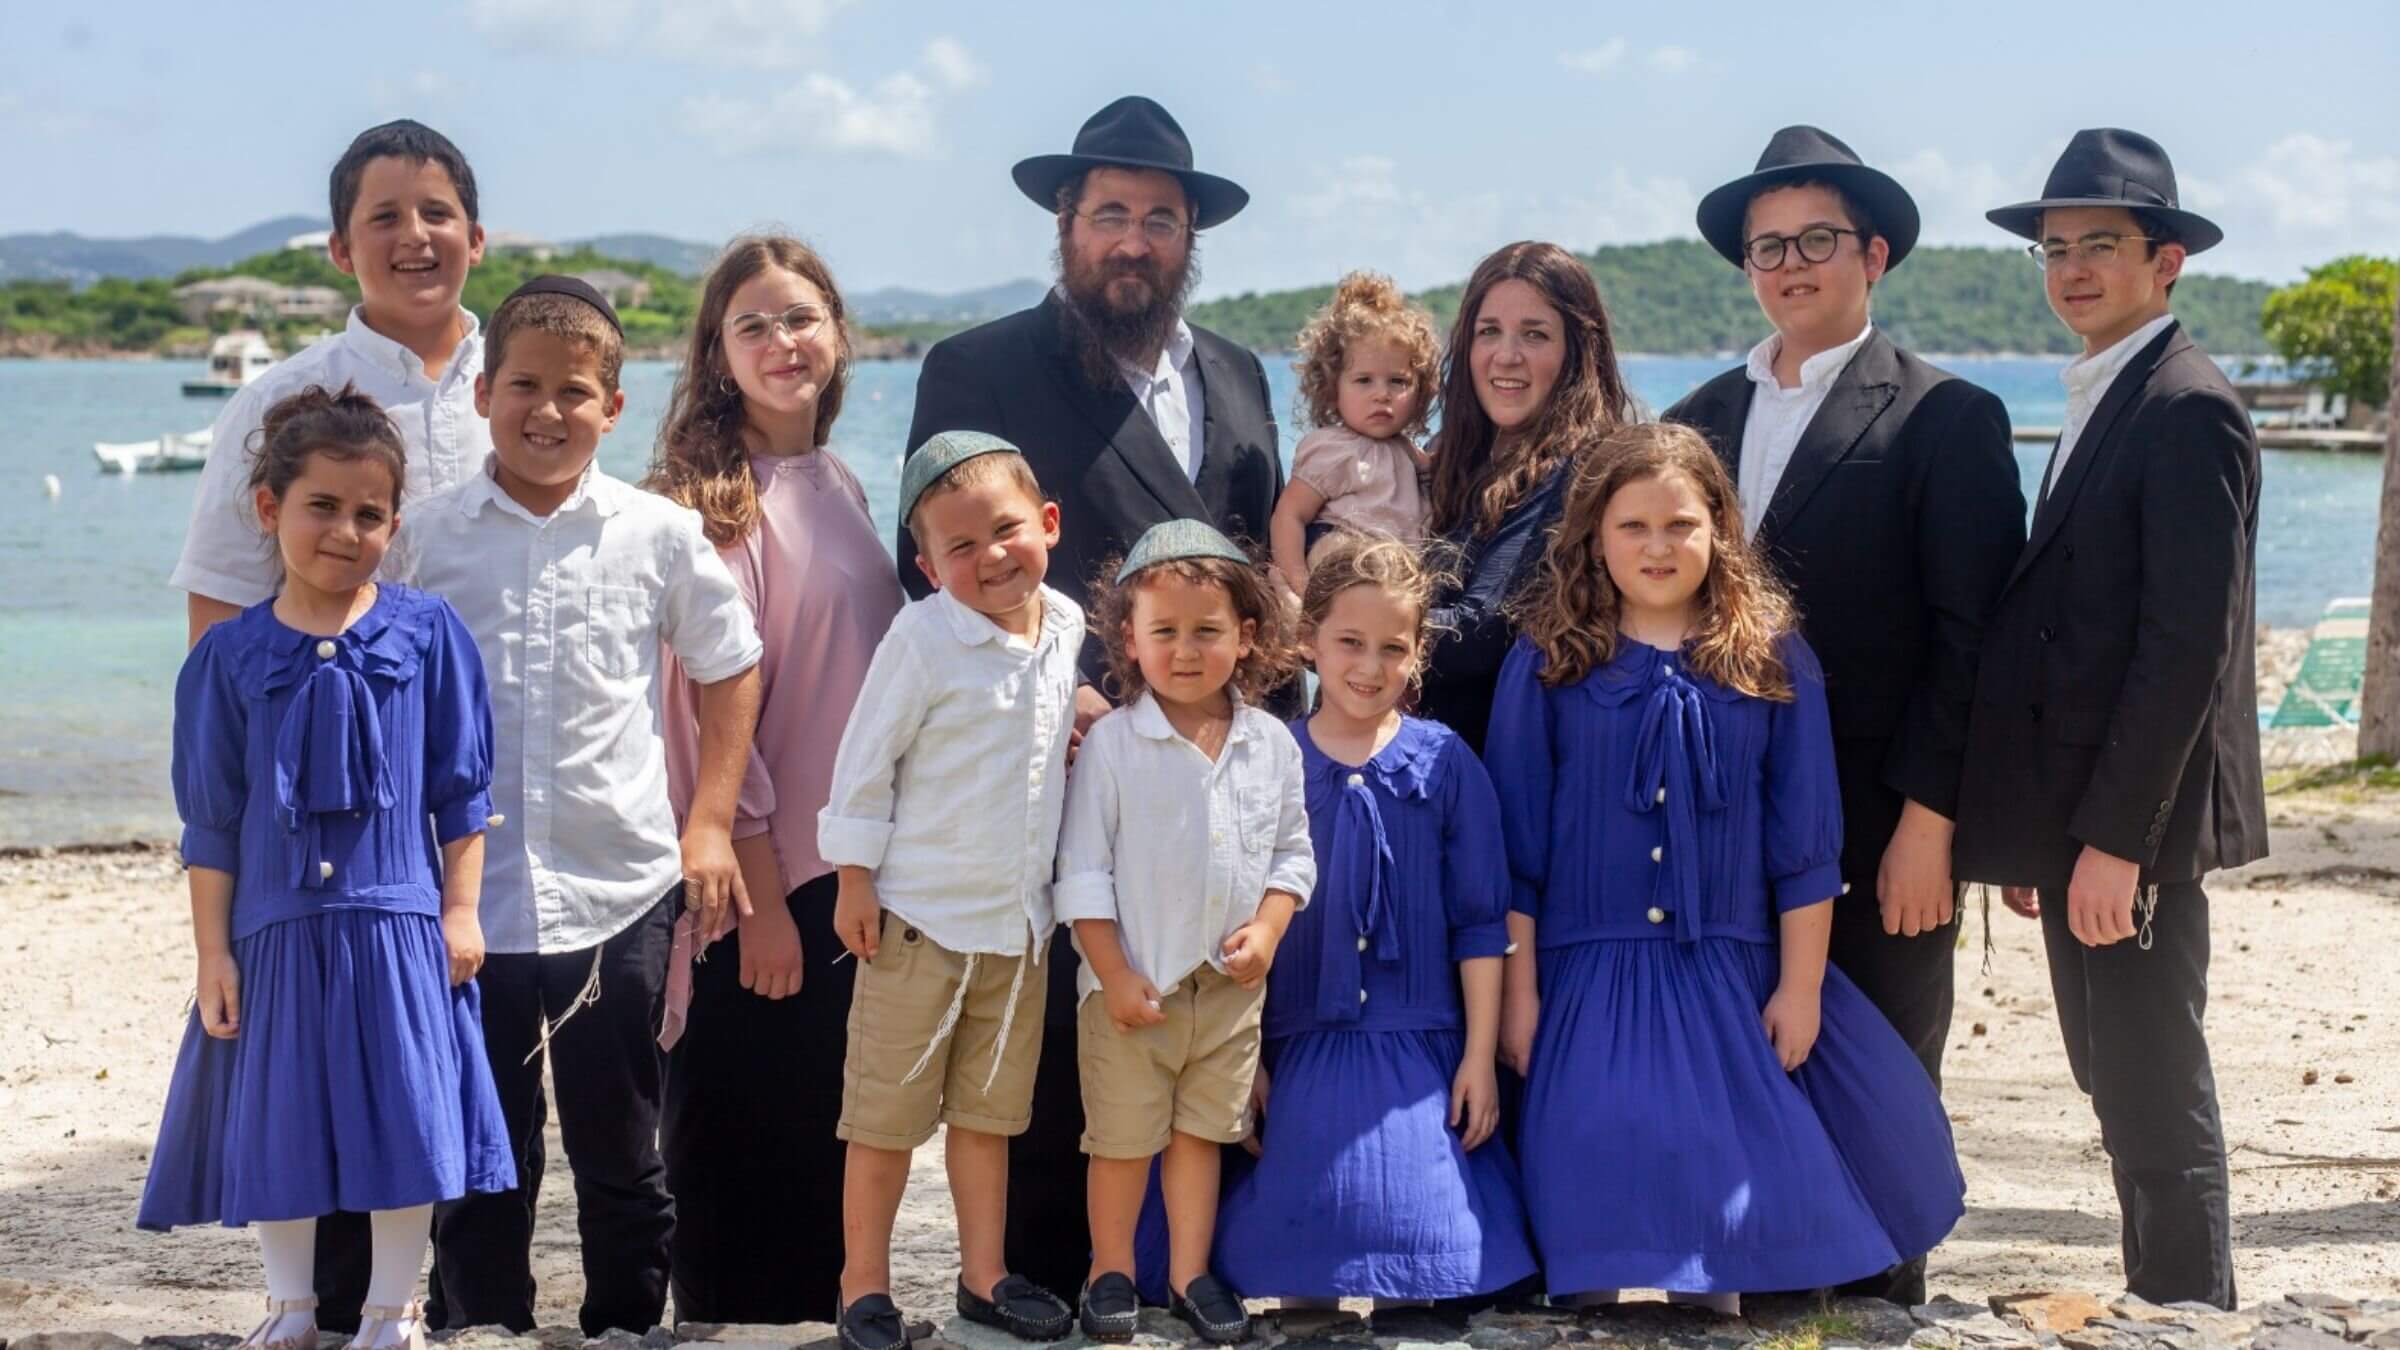 Henya Federman, pictured top row, third from right. She is survived by her husband, Rabbi Asher Federman, and their 12 children. 